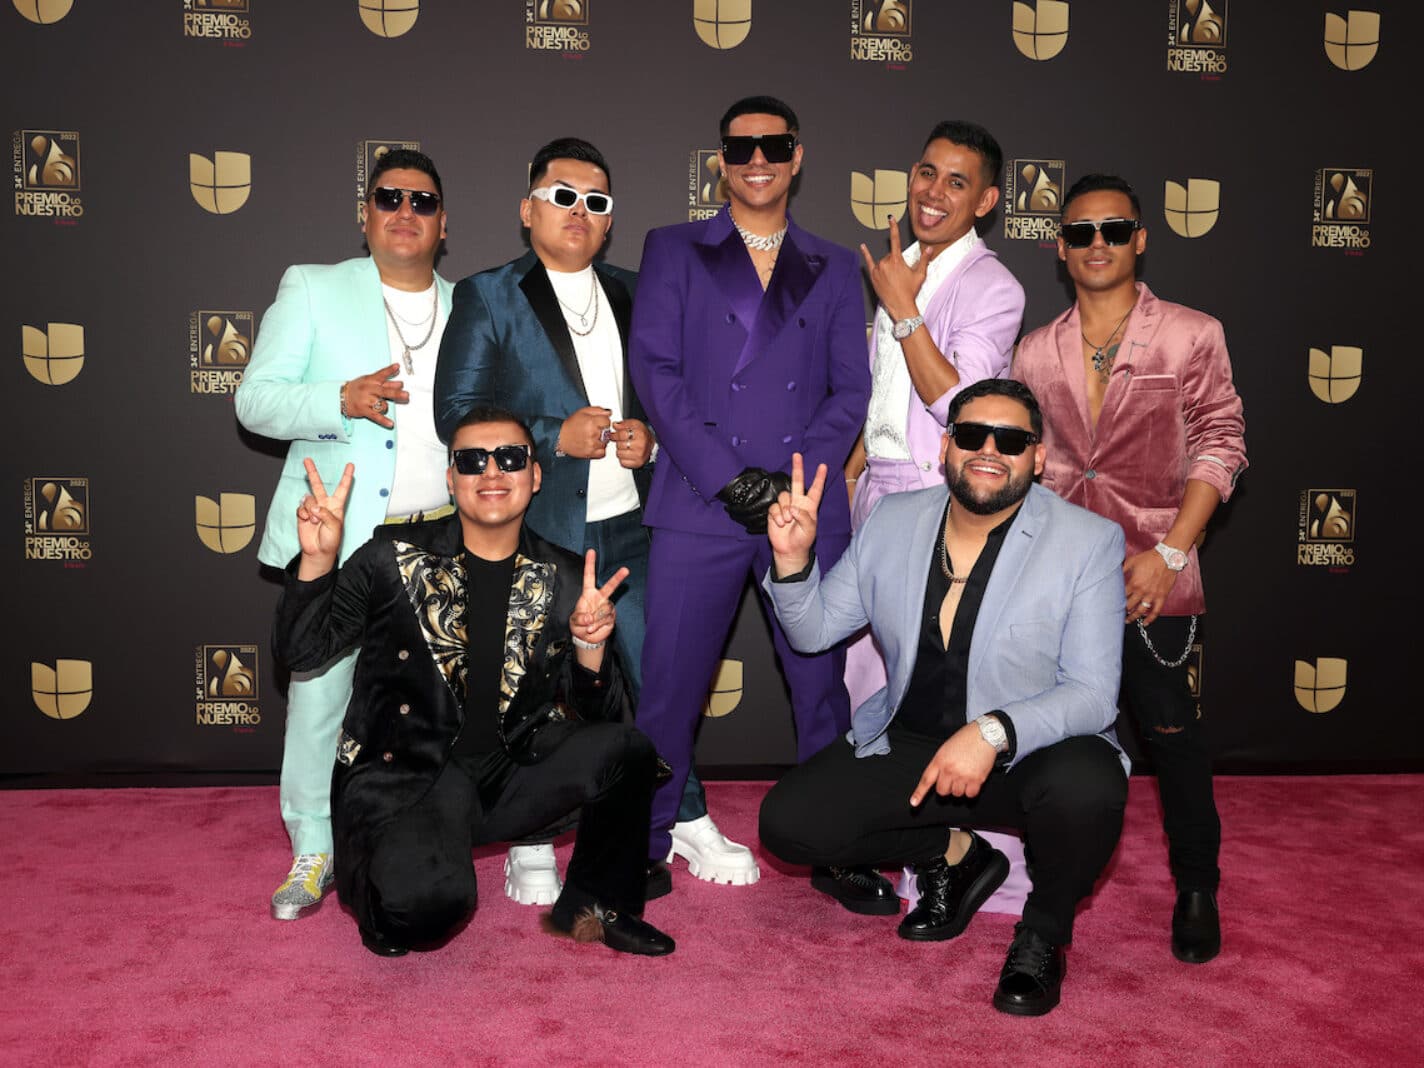 Grupo Firme Headlines the Halftime Show for NFL Monday Night